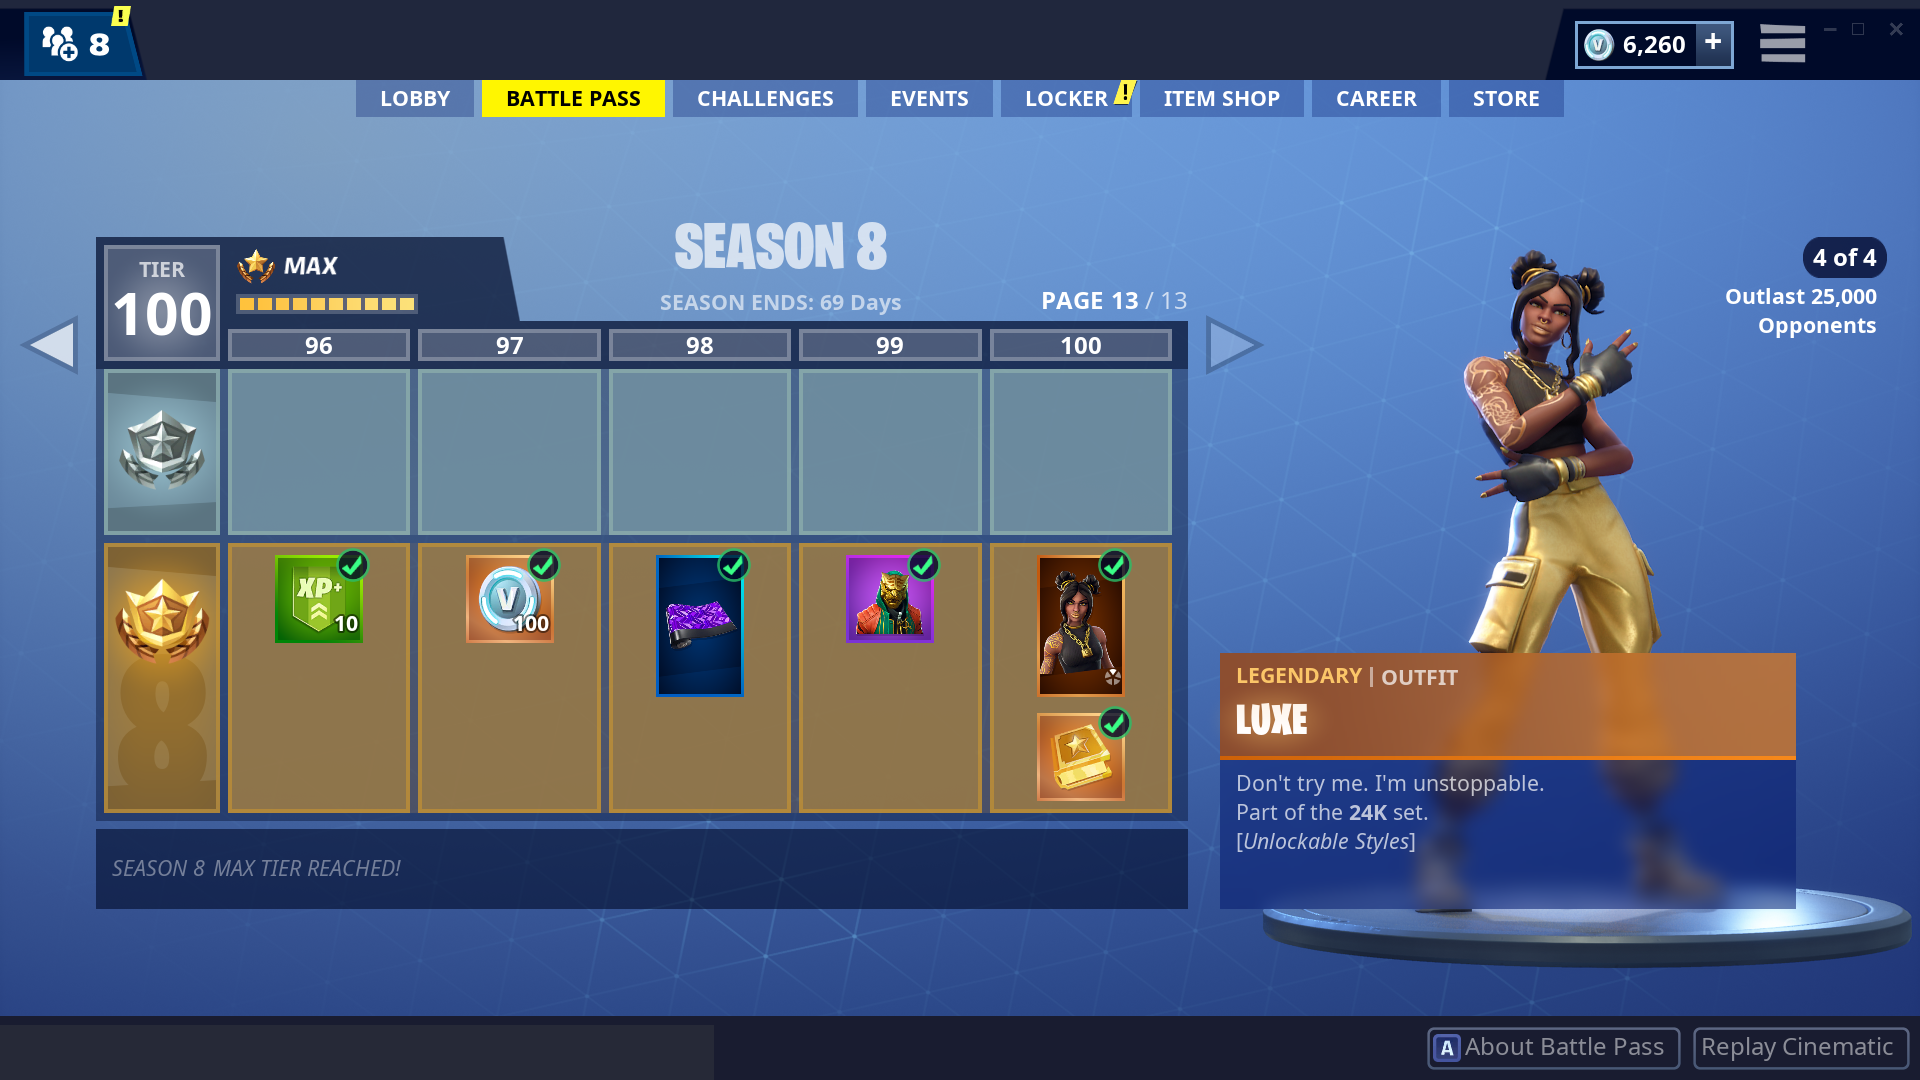 Fortnite Season 8 All Battle Pass Tiers And Rewards Fortnite News - in case you missed it there s also a bunch of new item shop skins coming soon which were found in the game files click here to see those